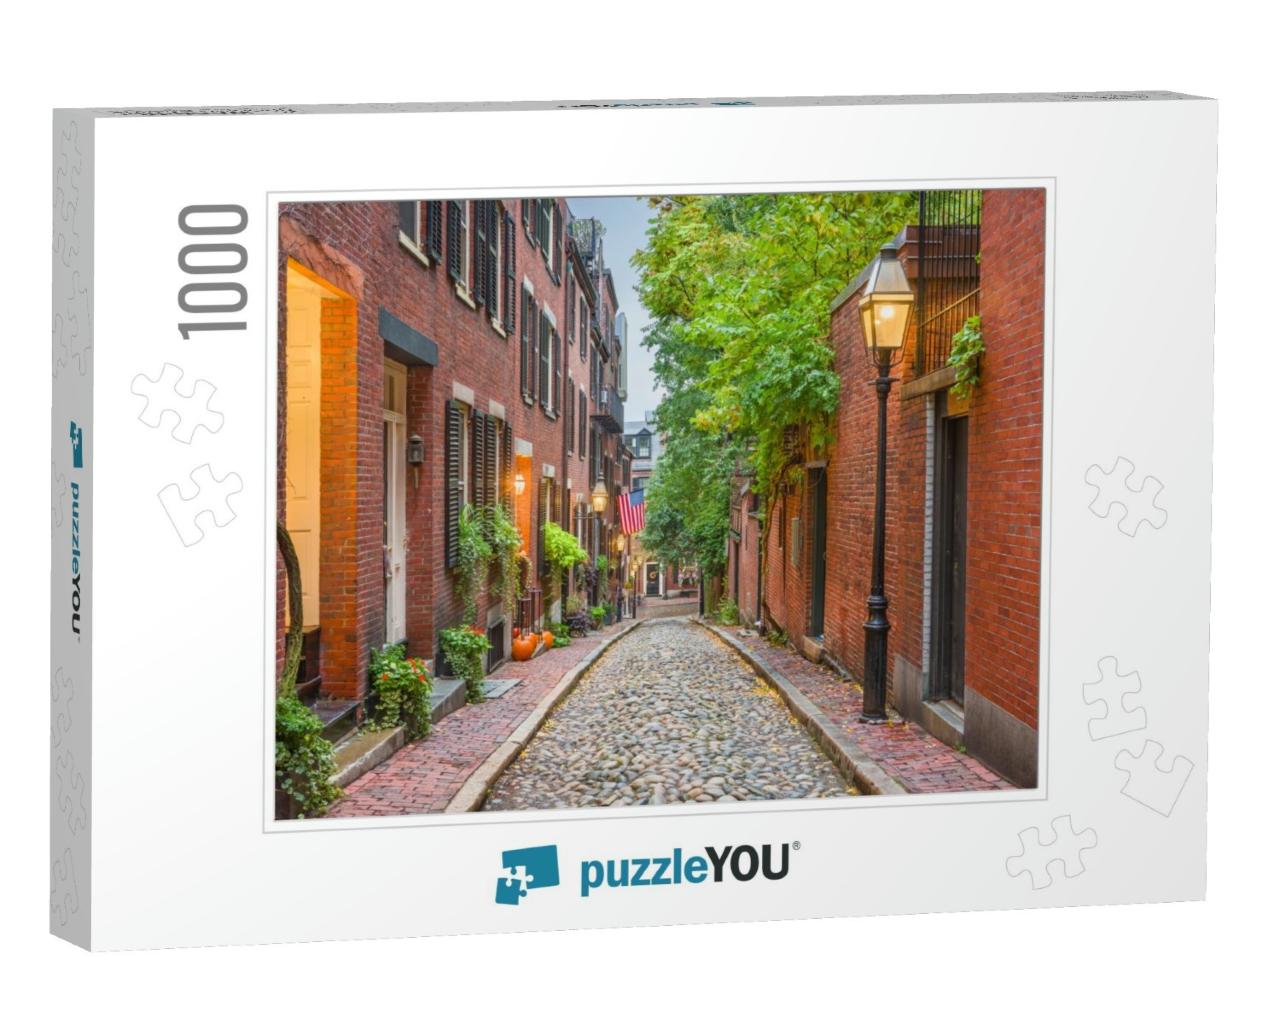 Acorn Street in Boston, Massachusetts, Usa... Jigsaw Puzzle with 1000 pieces